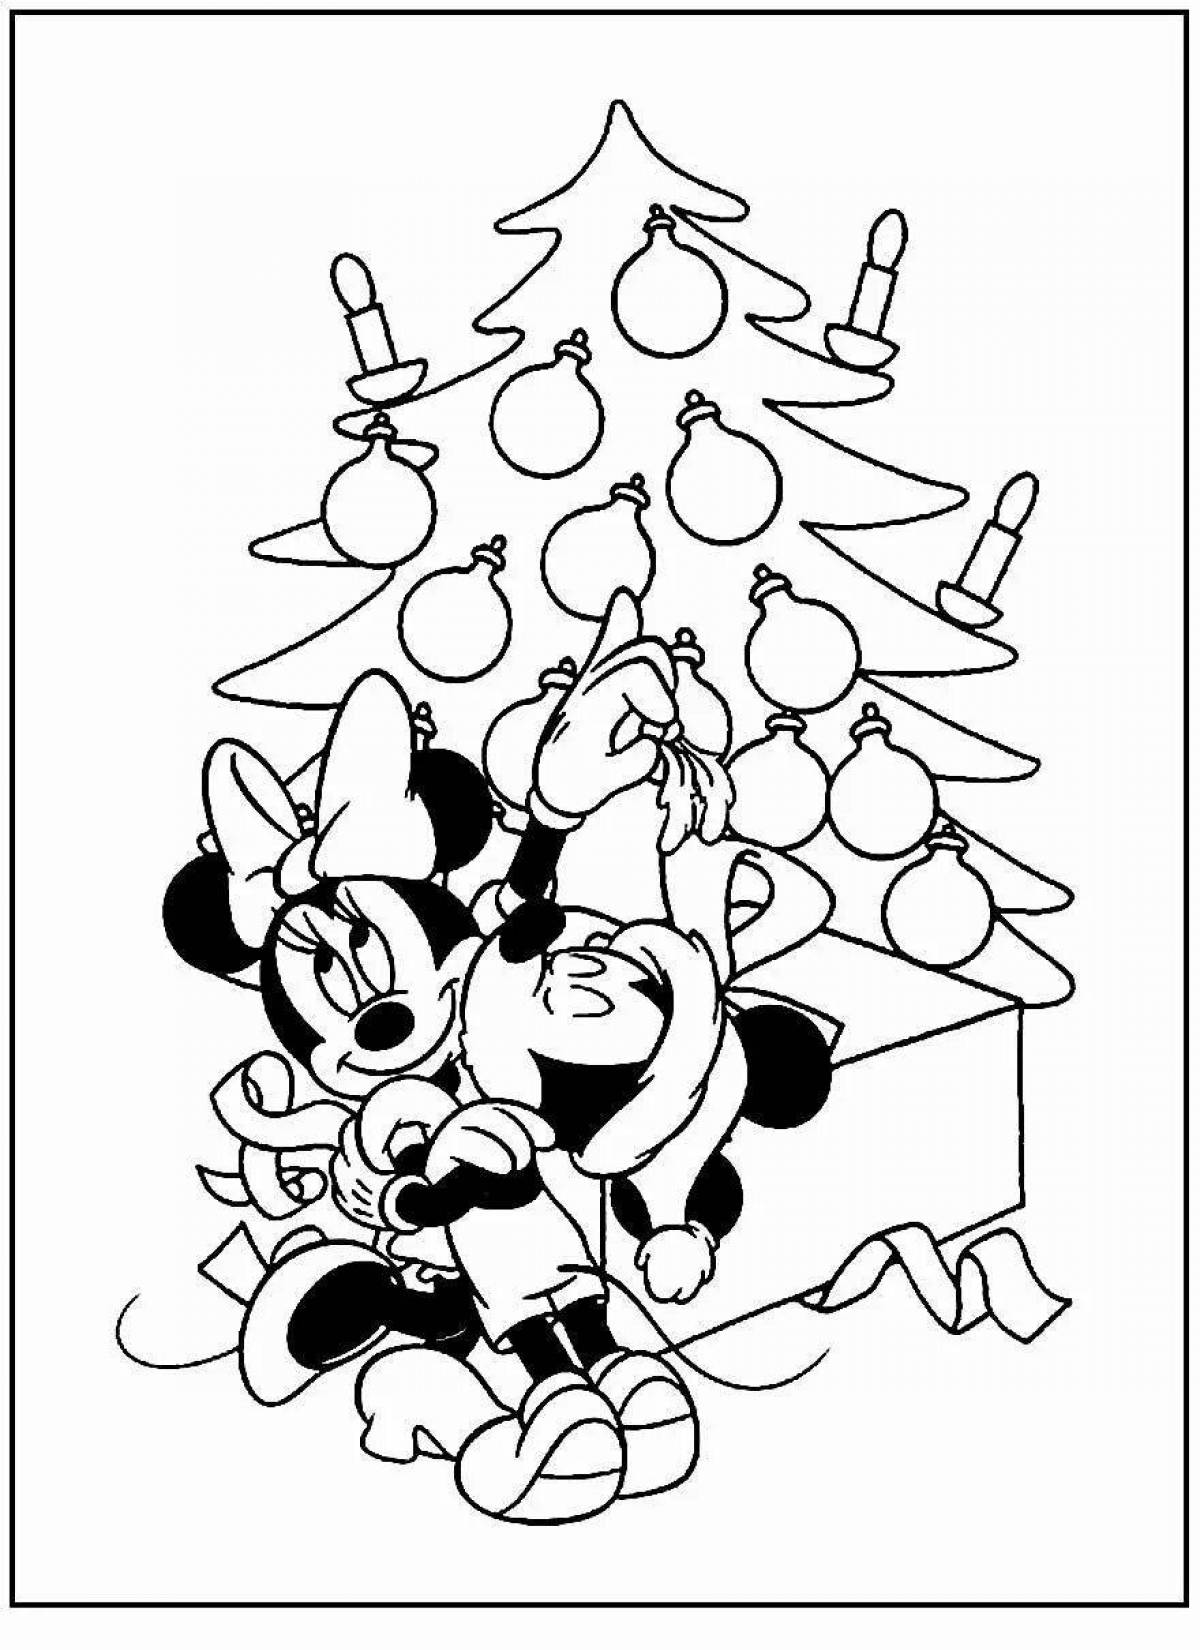 Exquisite mickey mouse christmas coloring book